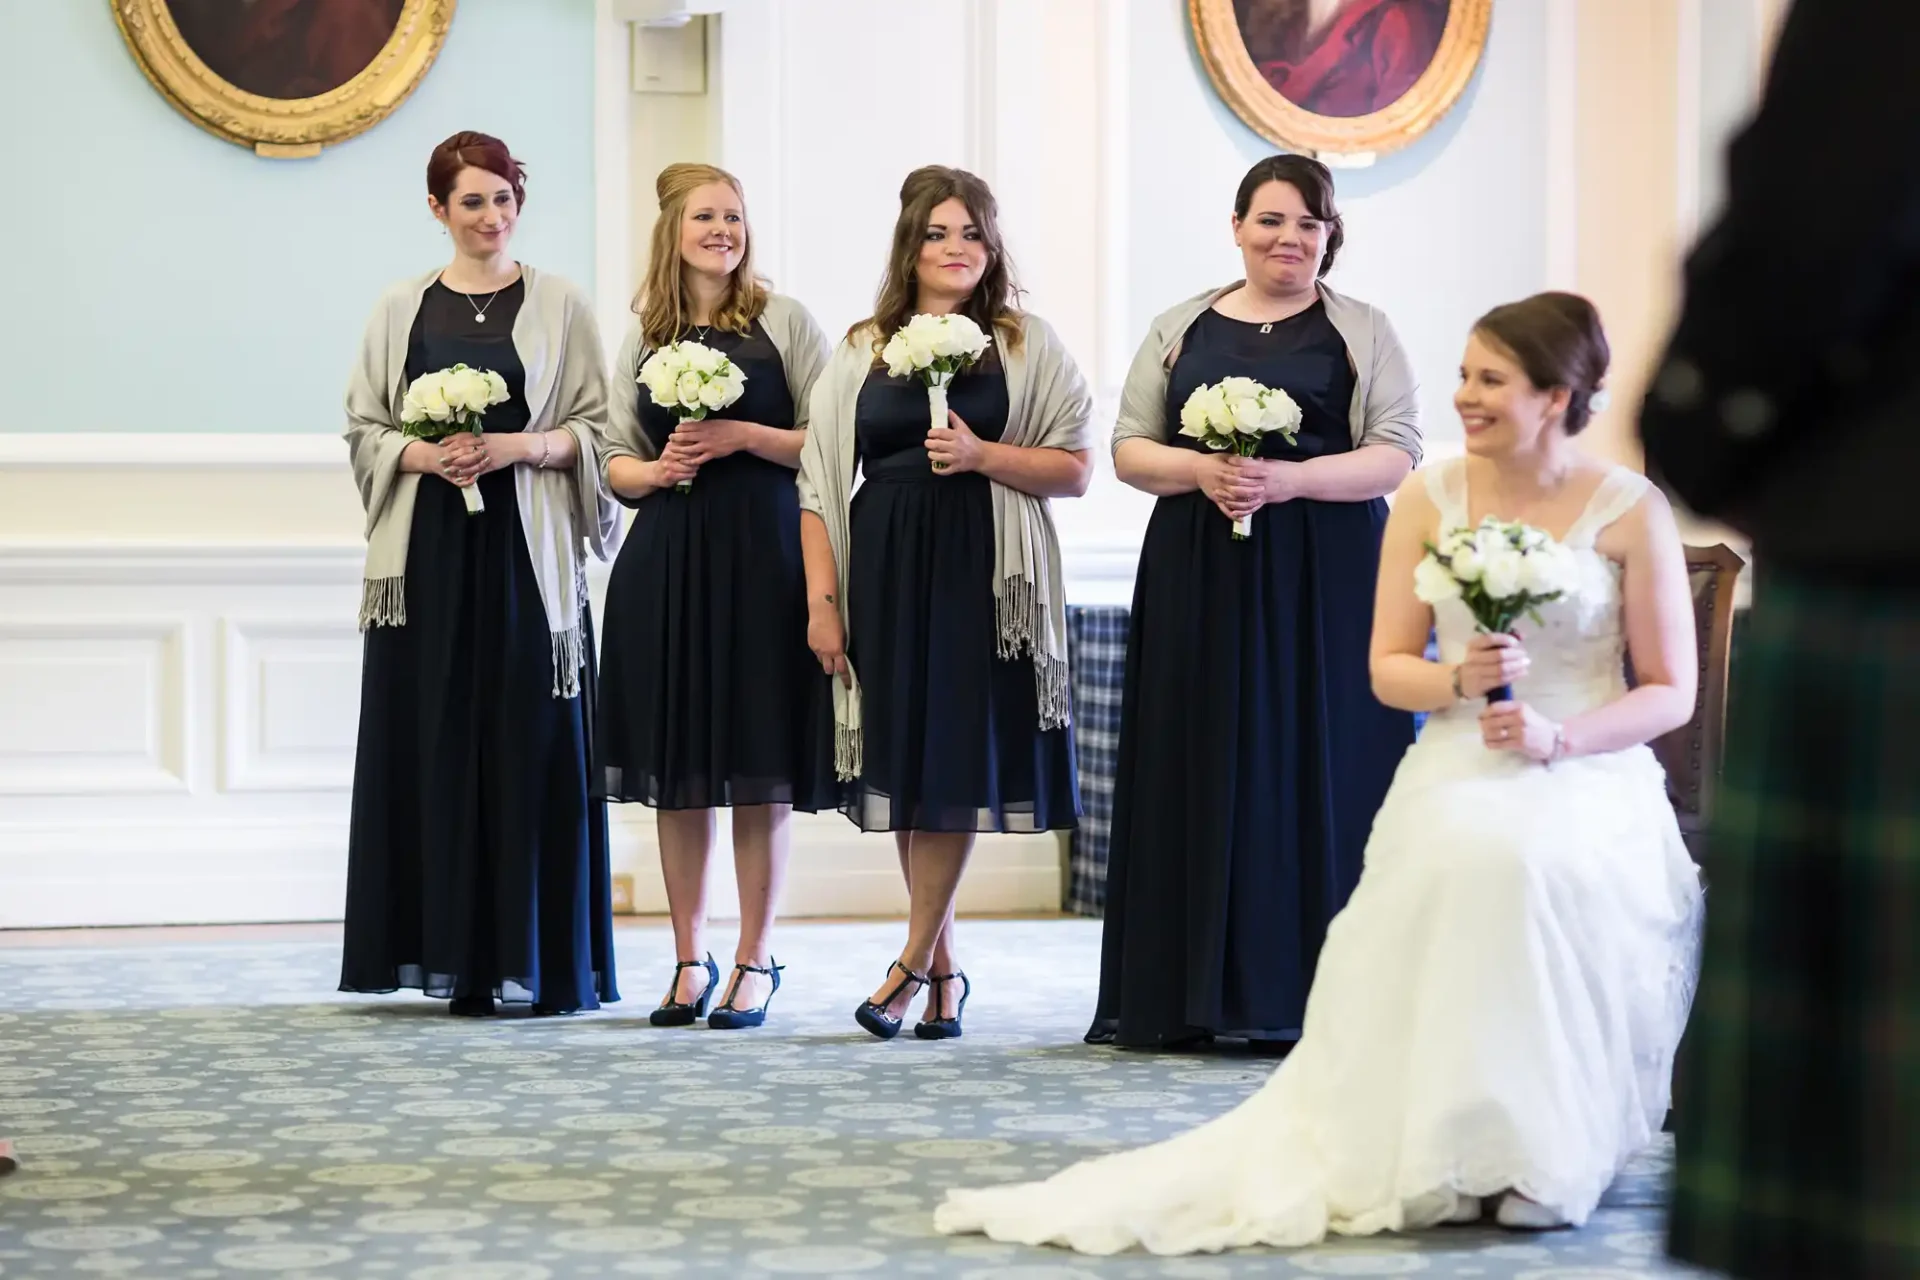 Four bridesmaids holding bouquets stand in a line, smiling towards a bride seated in the foreground in a wedding hall.